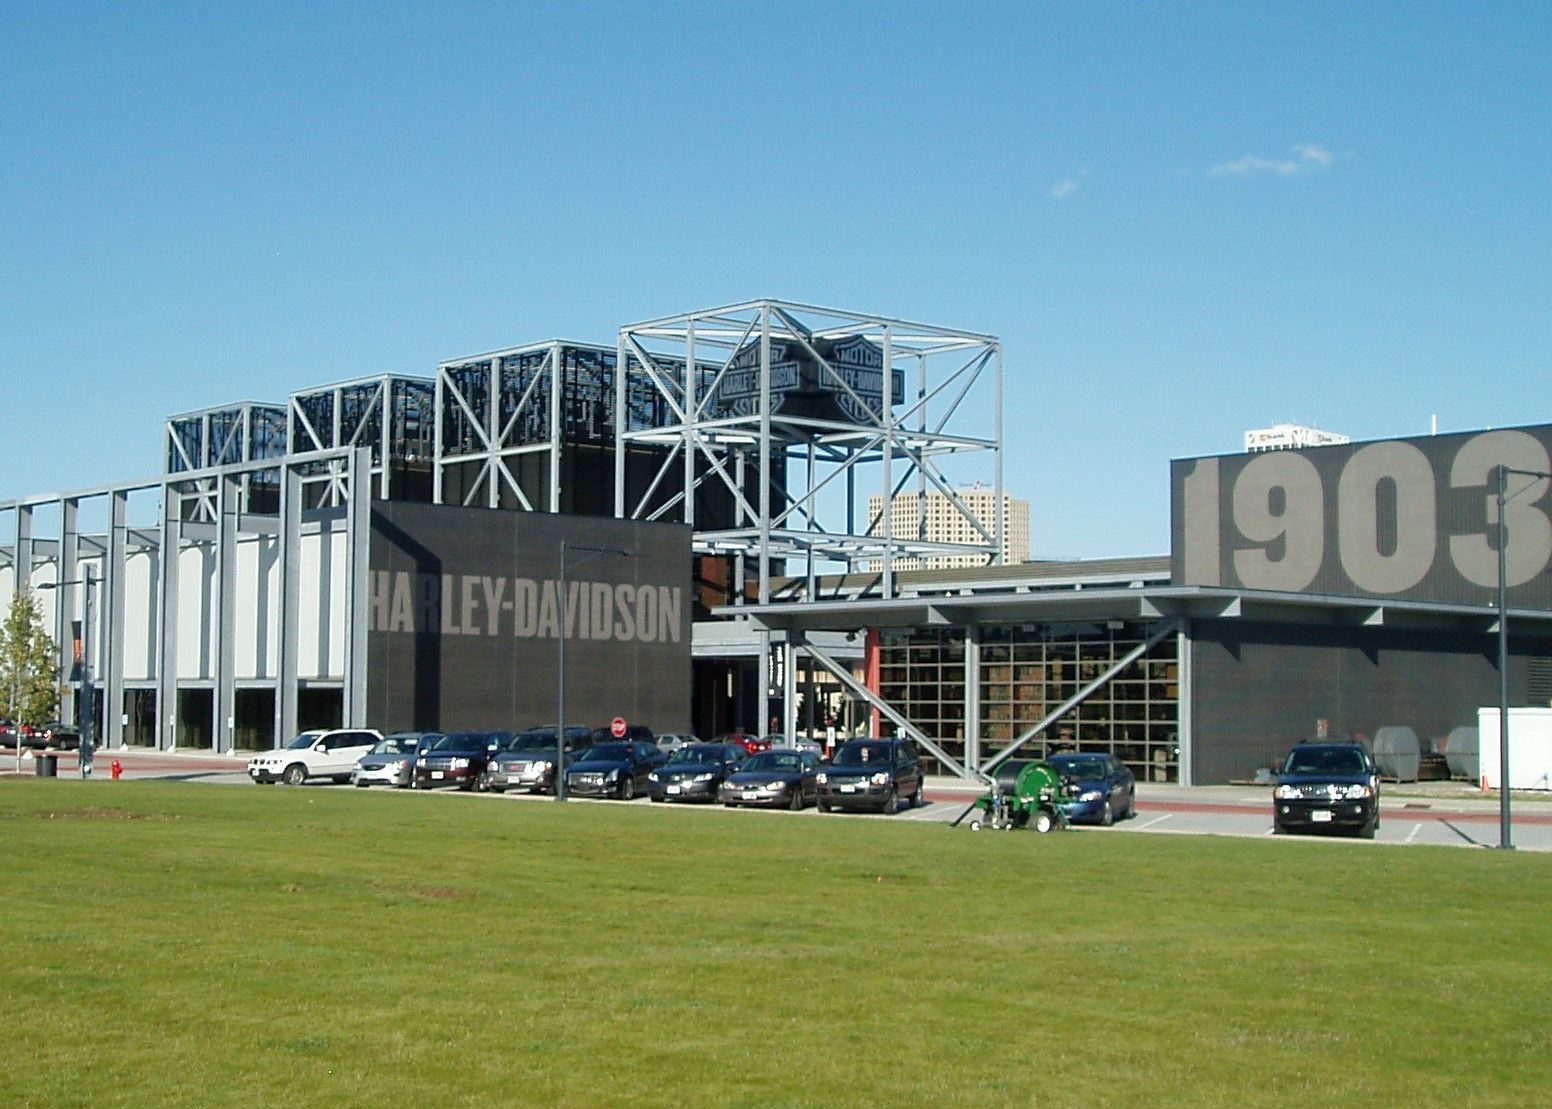 Harley Davidson Museum from the outside.